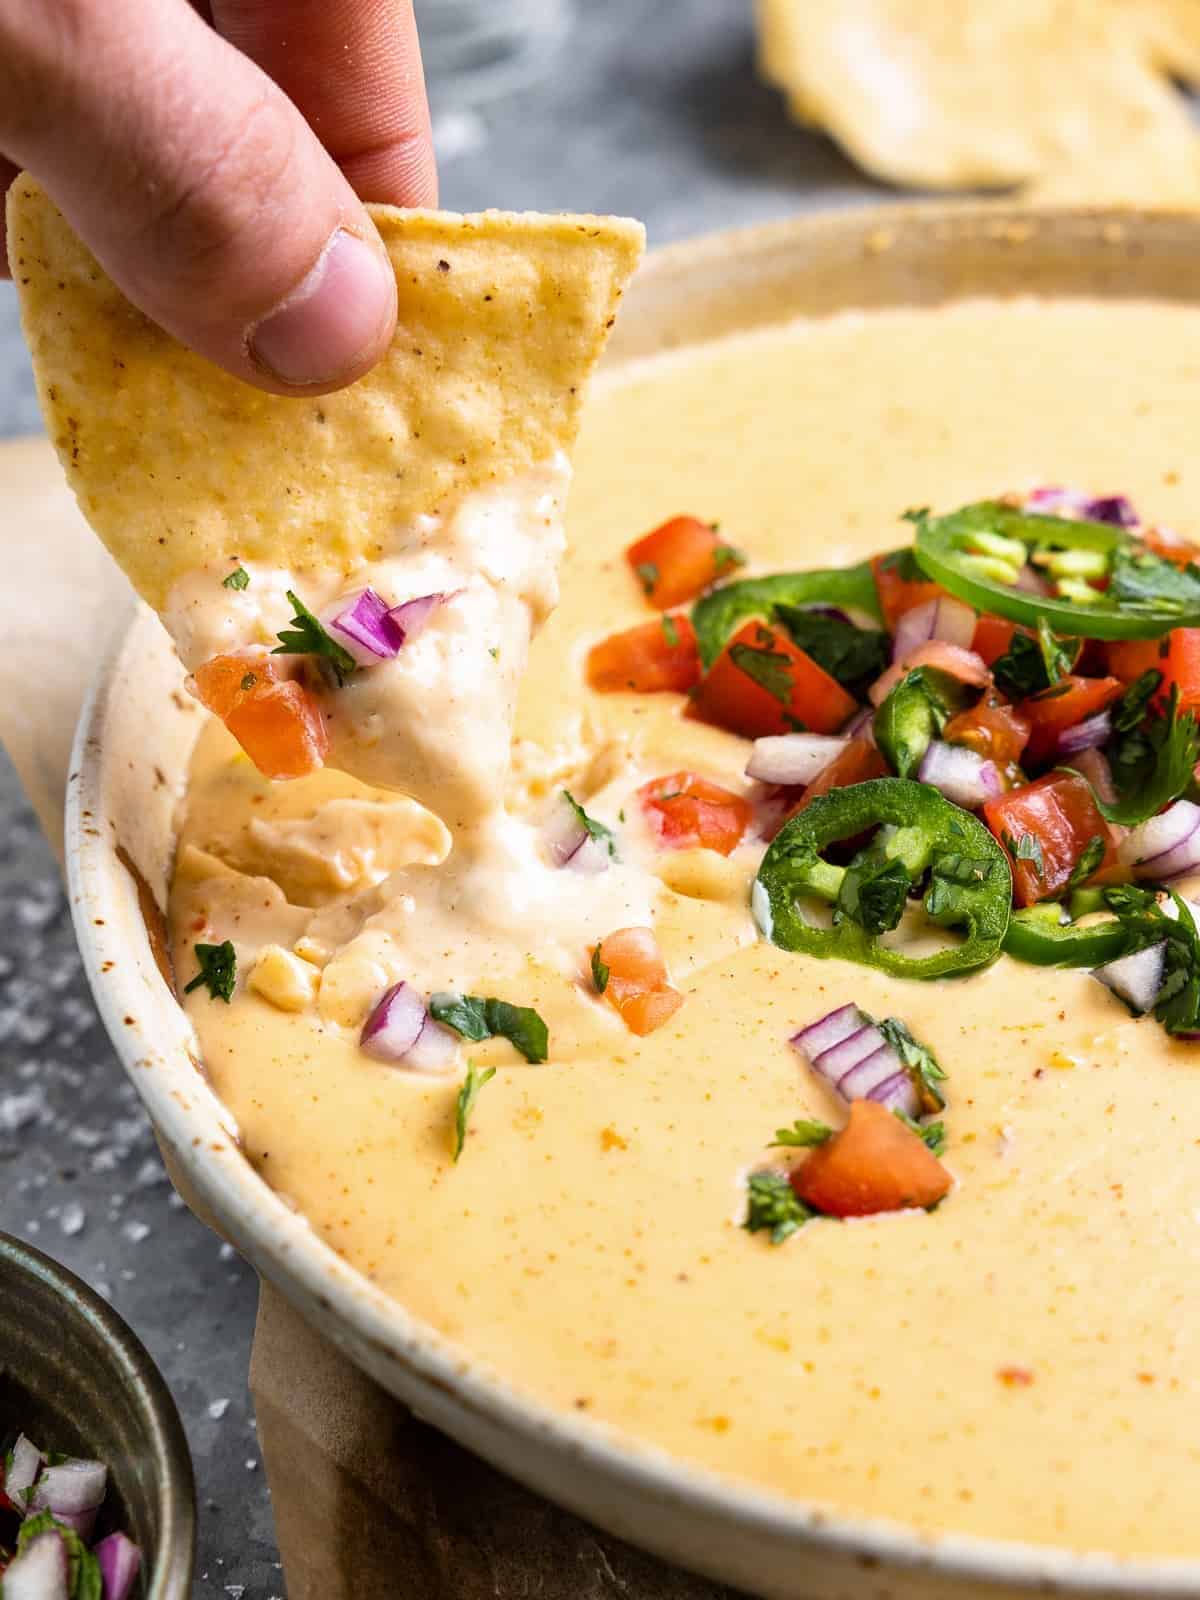 a hand dopping a tortilla chips into a bowl of homemade queso blanco.